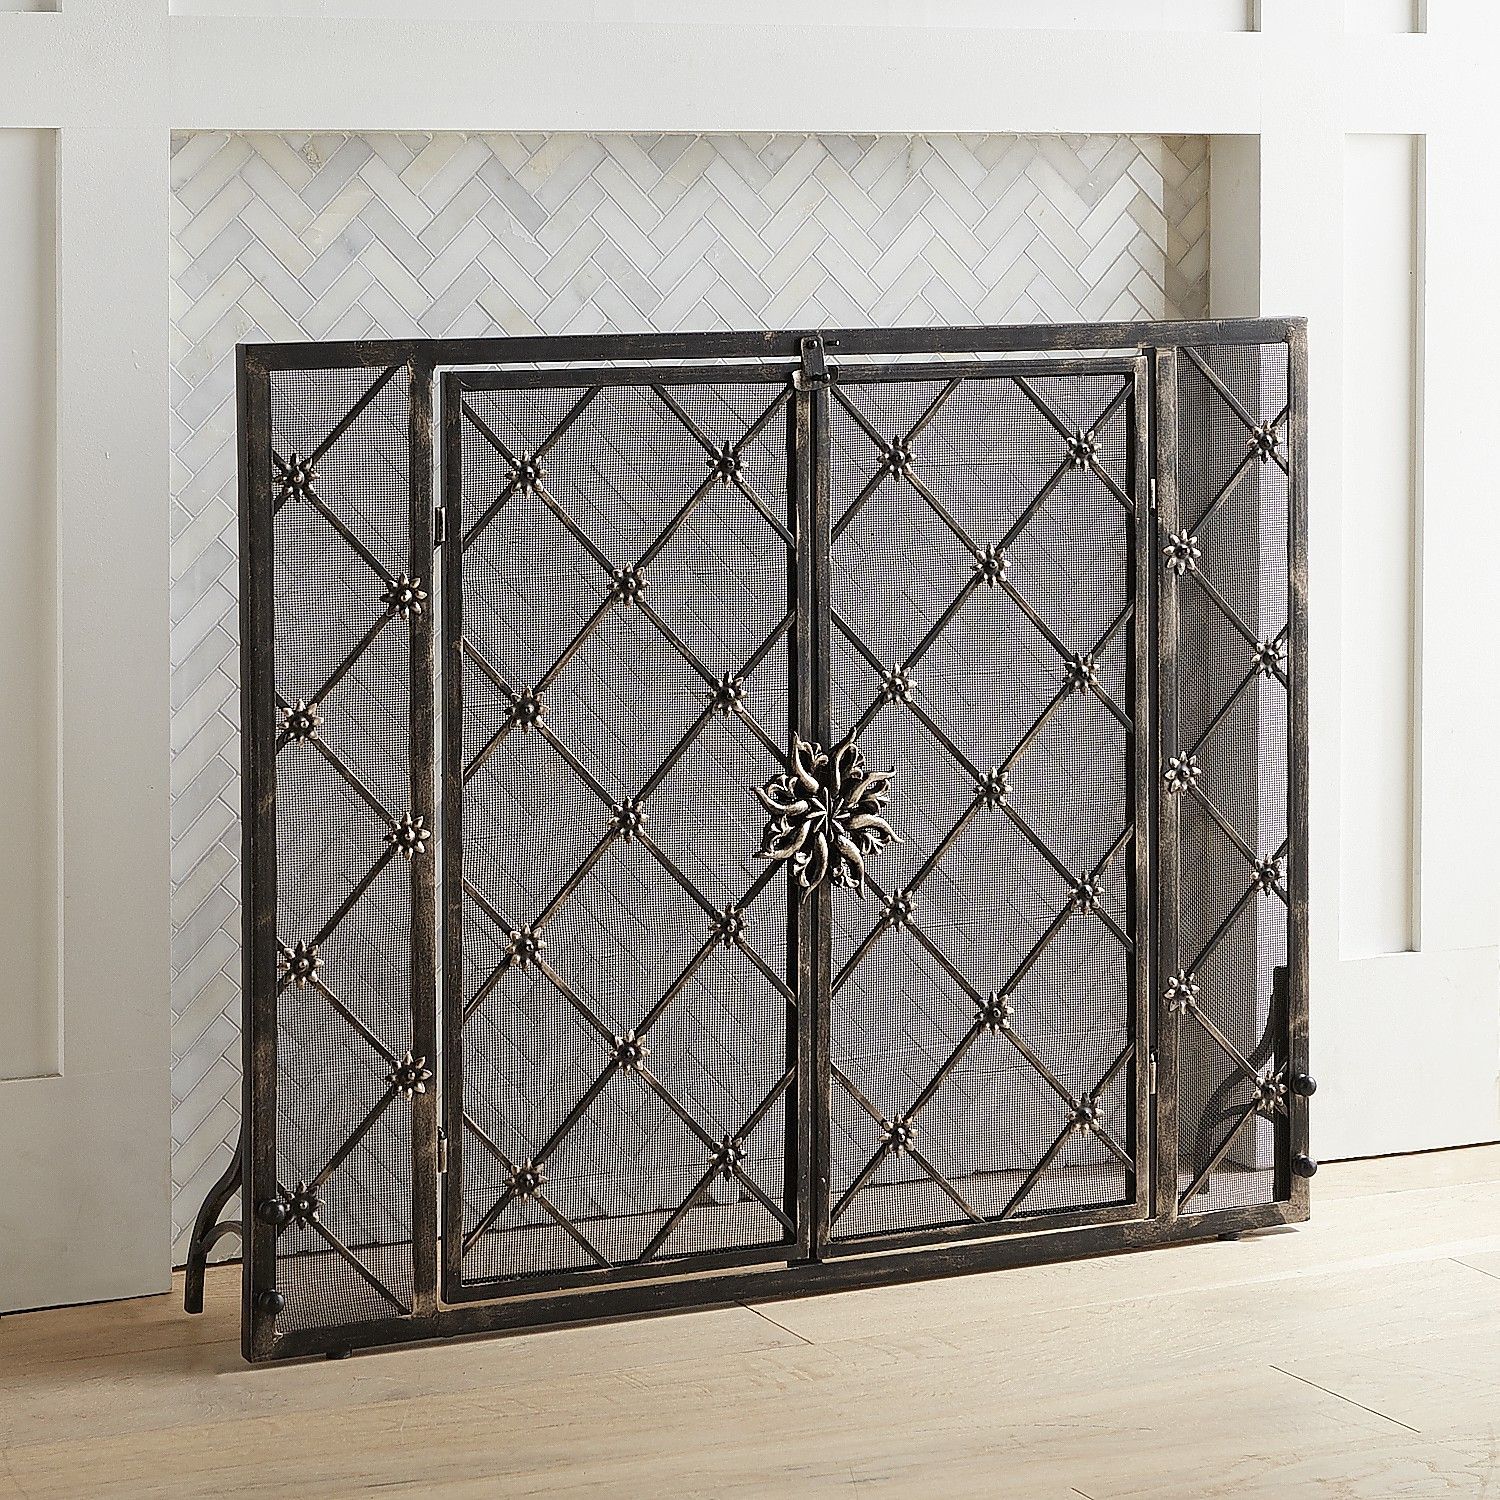 Barn Door Fireplace Screen Best Of Junction Fireplace Screen In 2019 Products